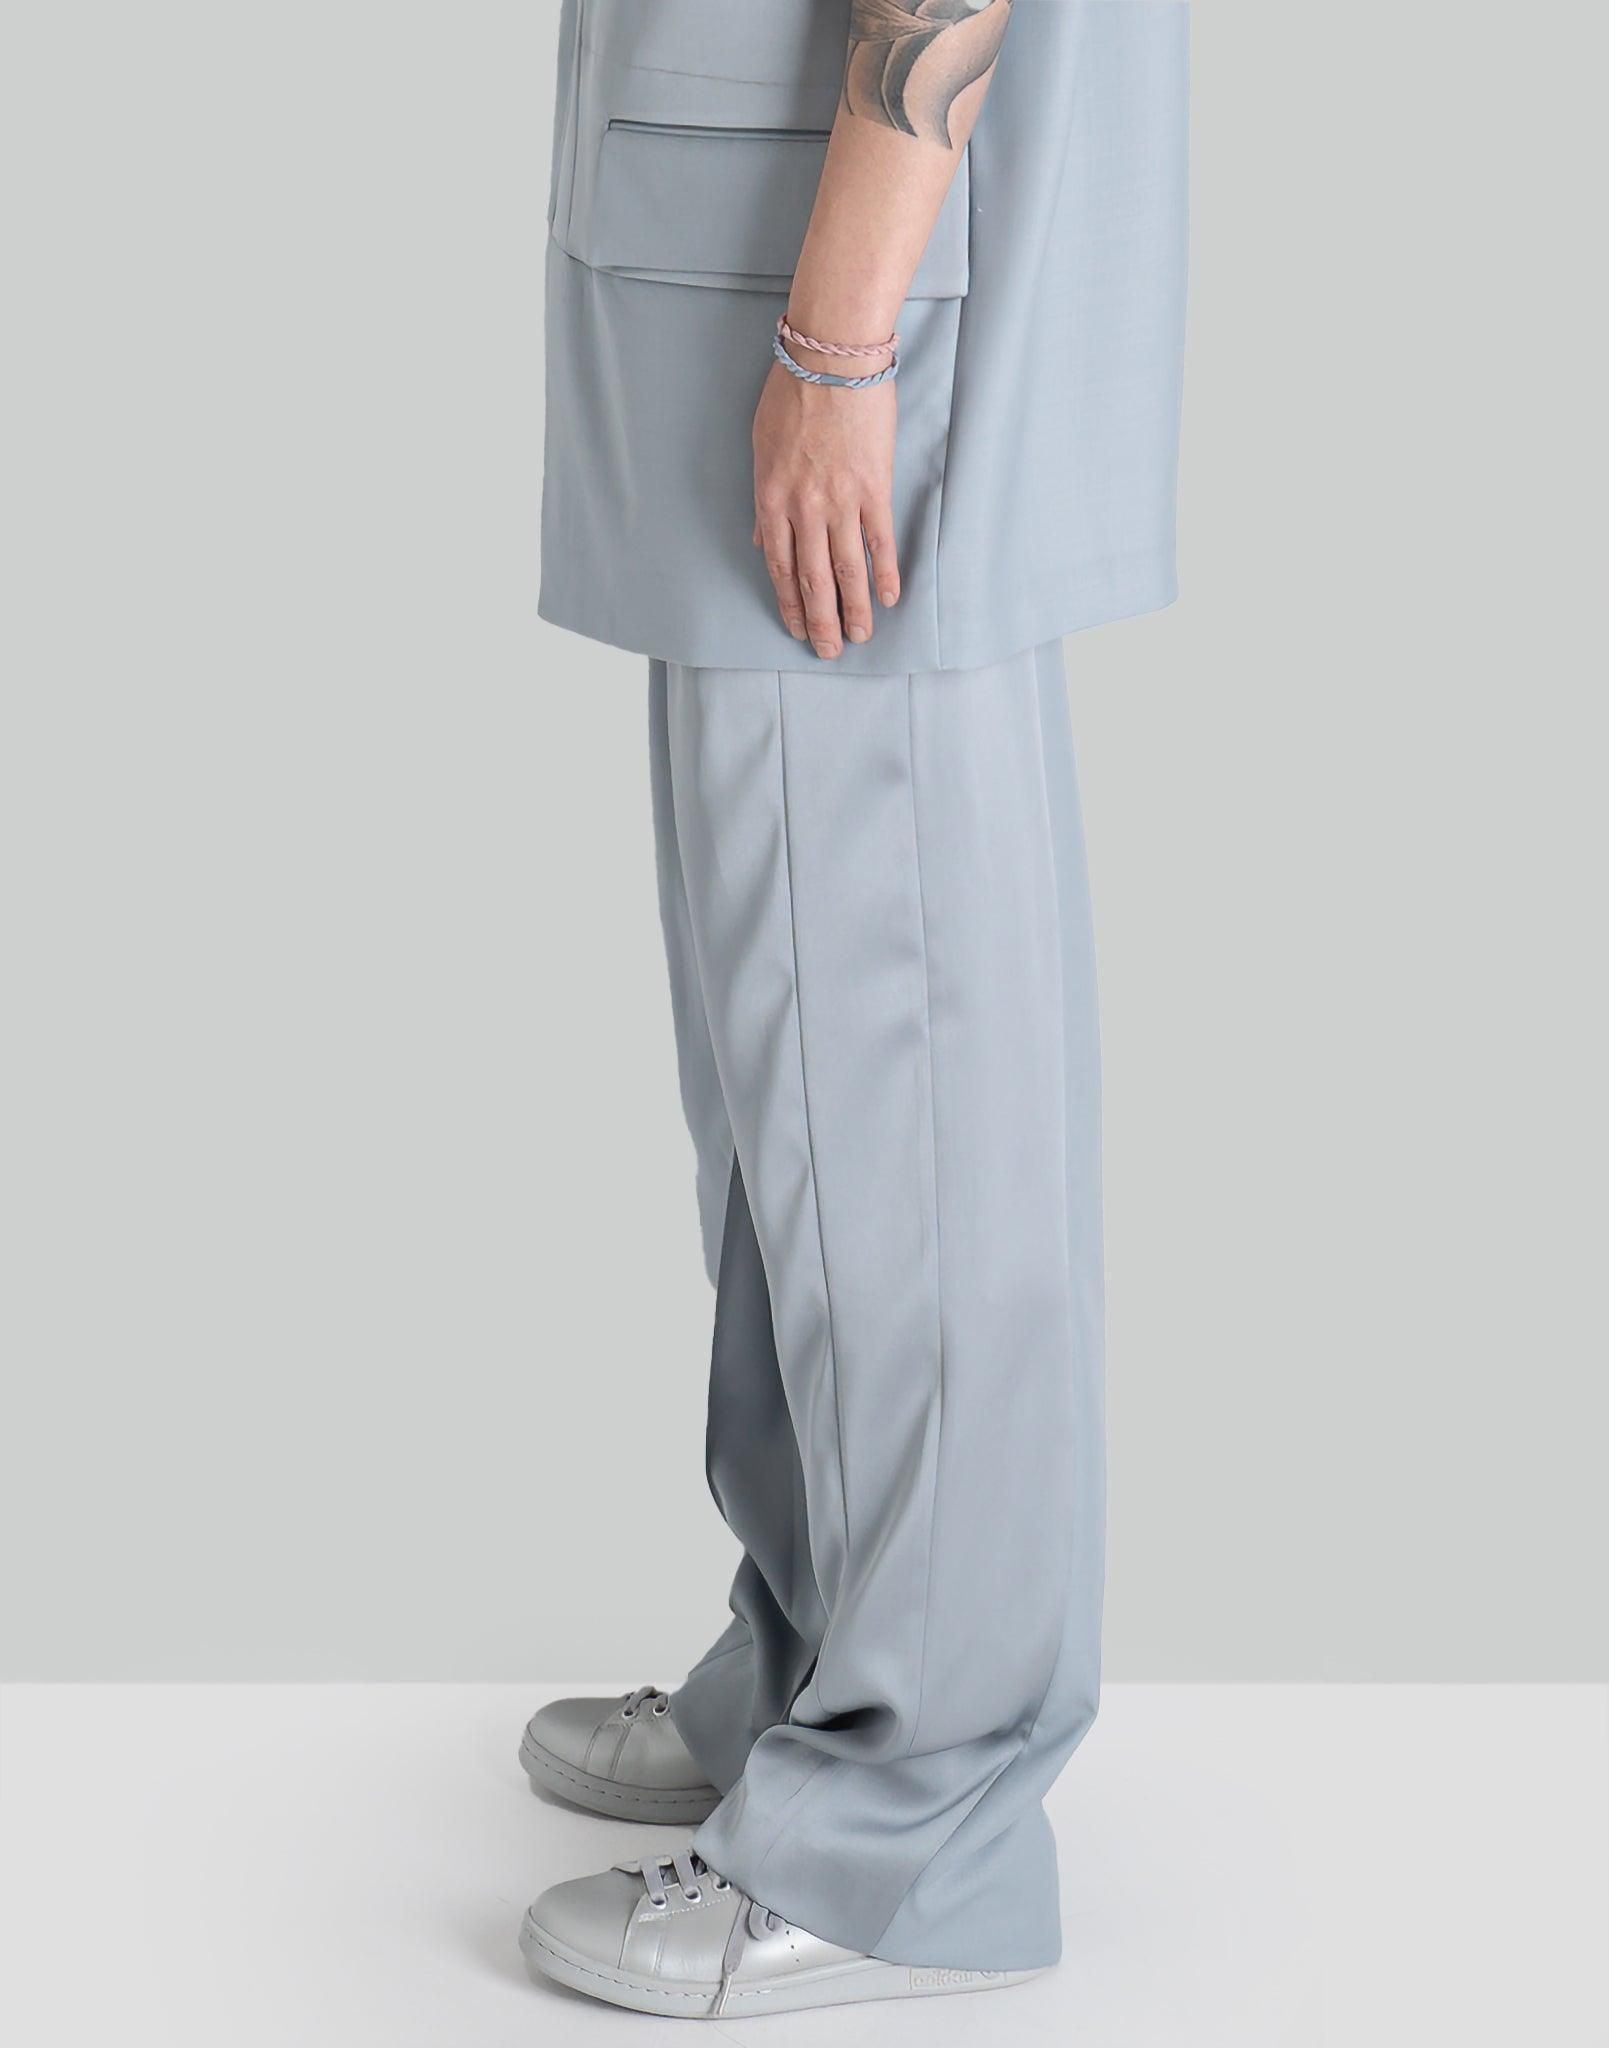 FENG CHEN WANG PLEATED SUIT TROUSERS - 082plus